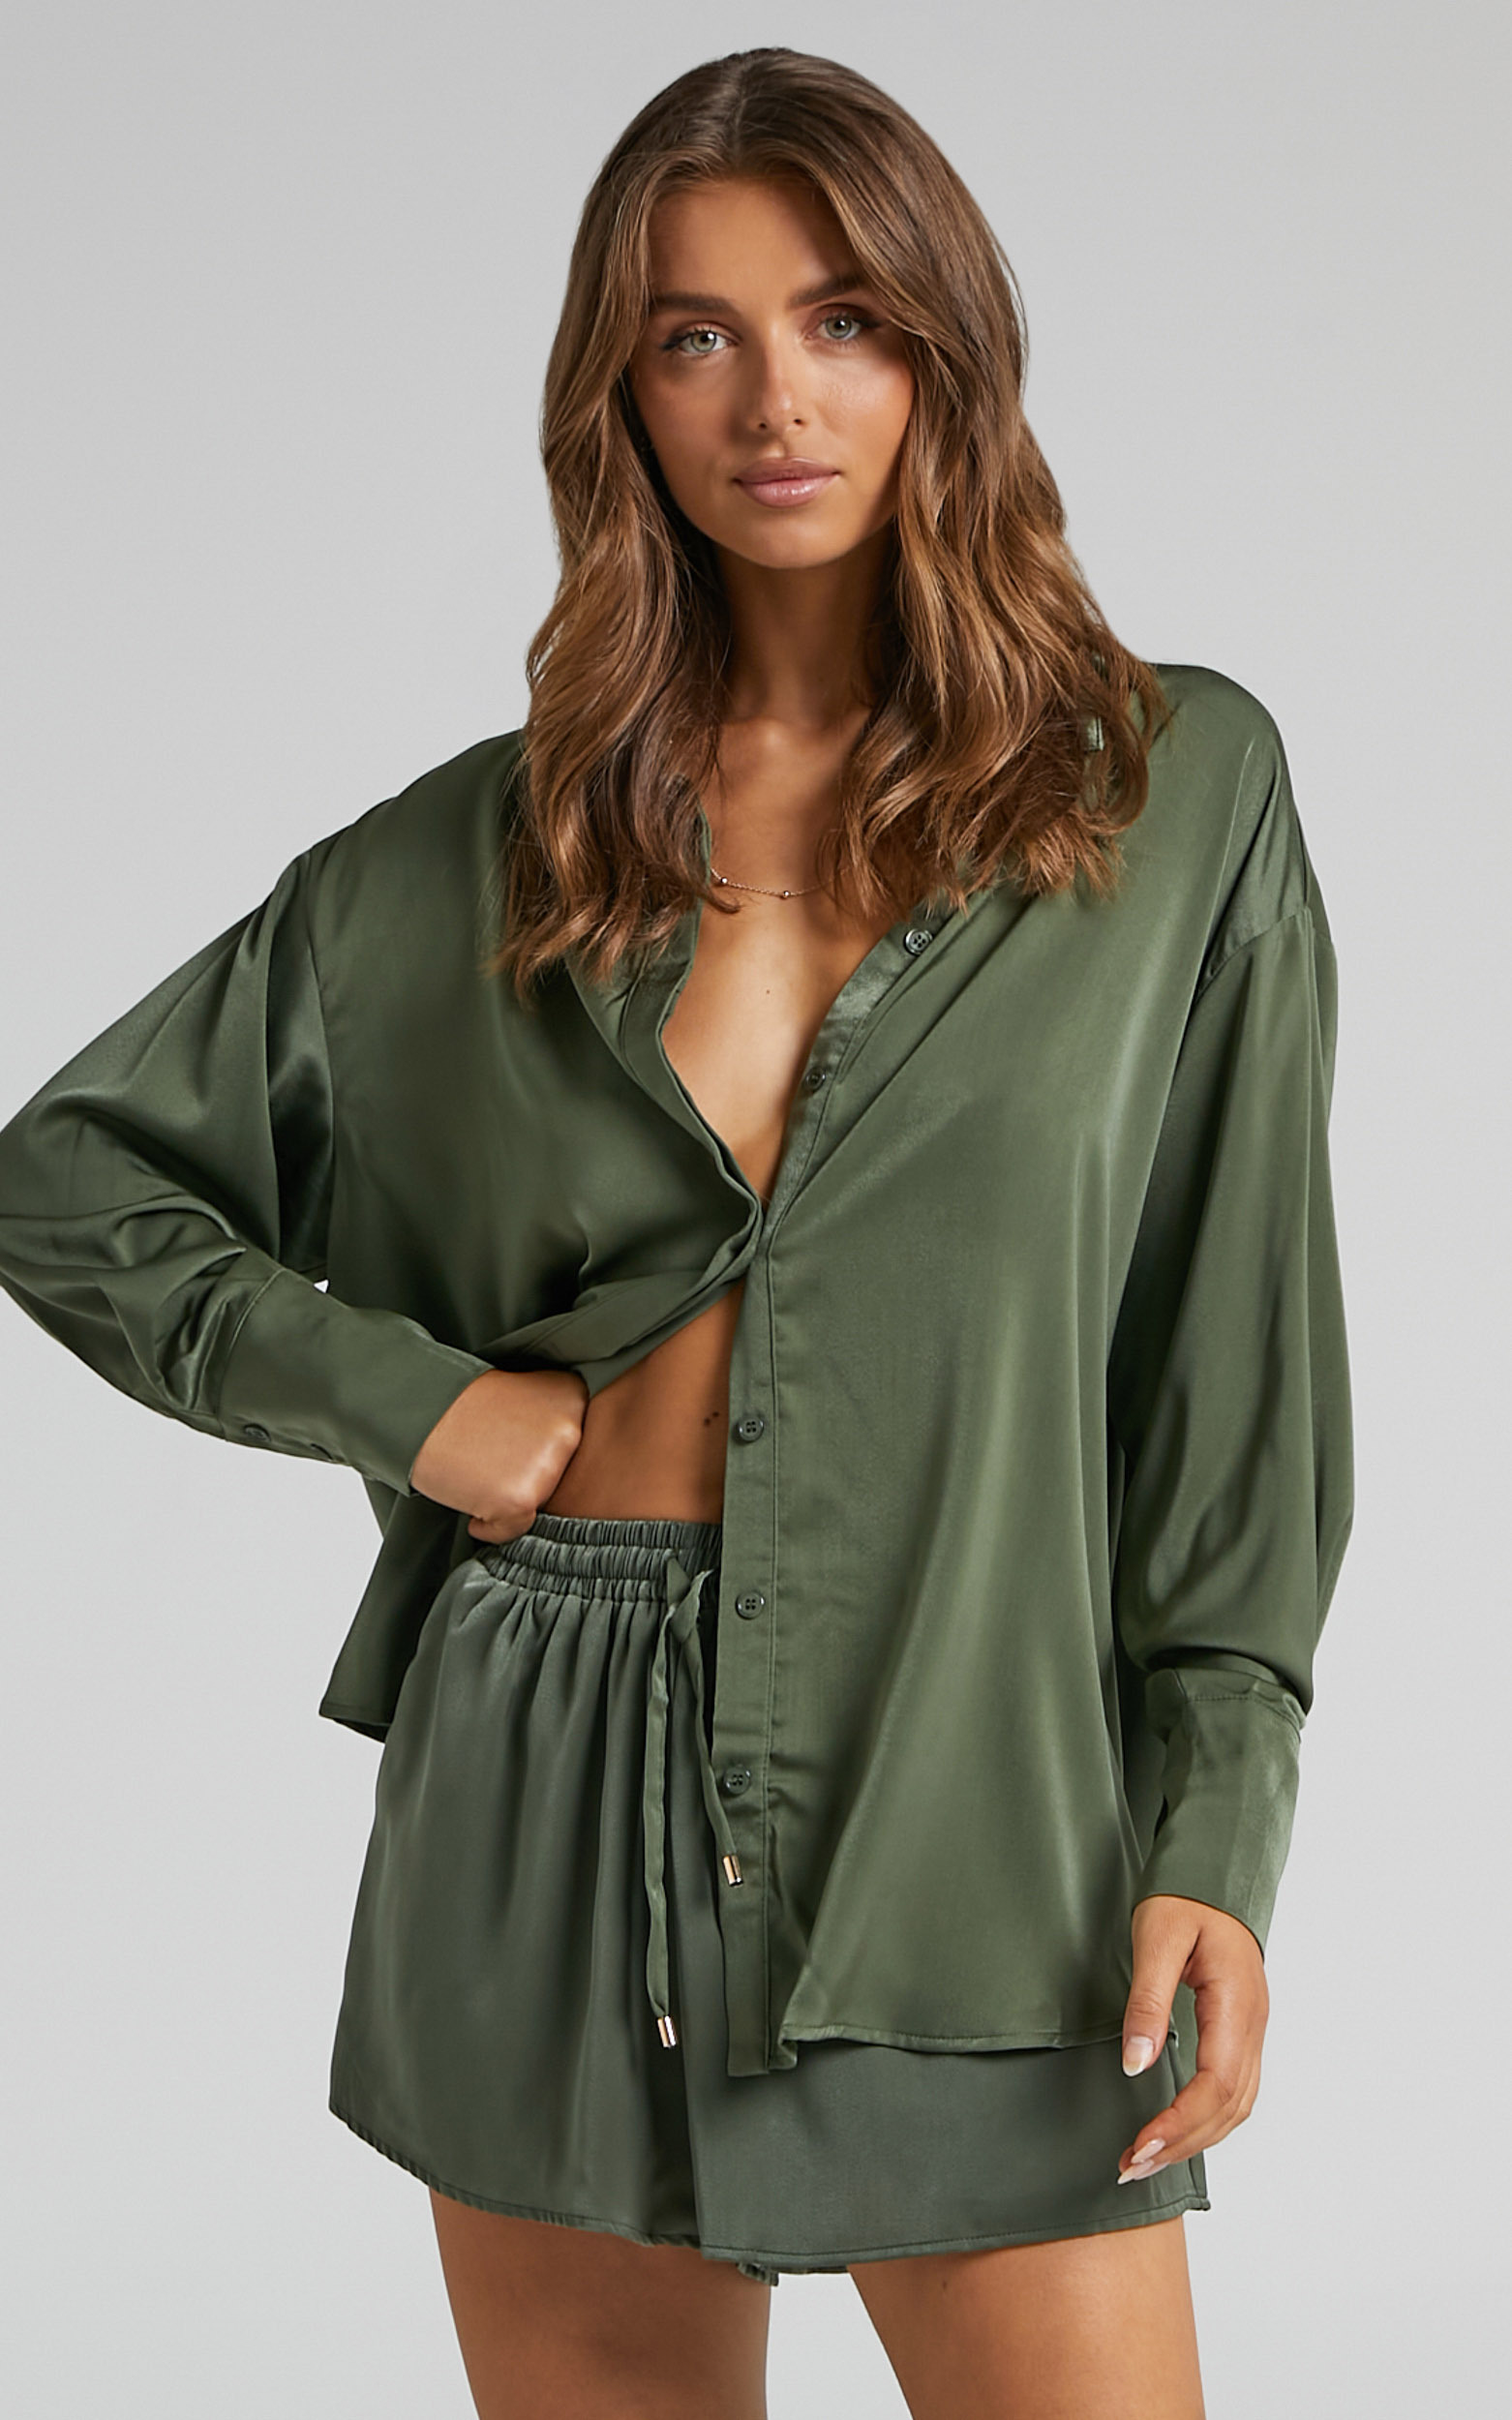 Azurine Oversized Button Up Satin Shirt in Olive - 06, GRN1, hi-res image number null